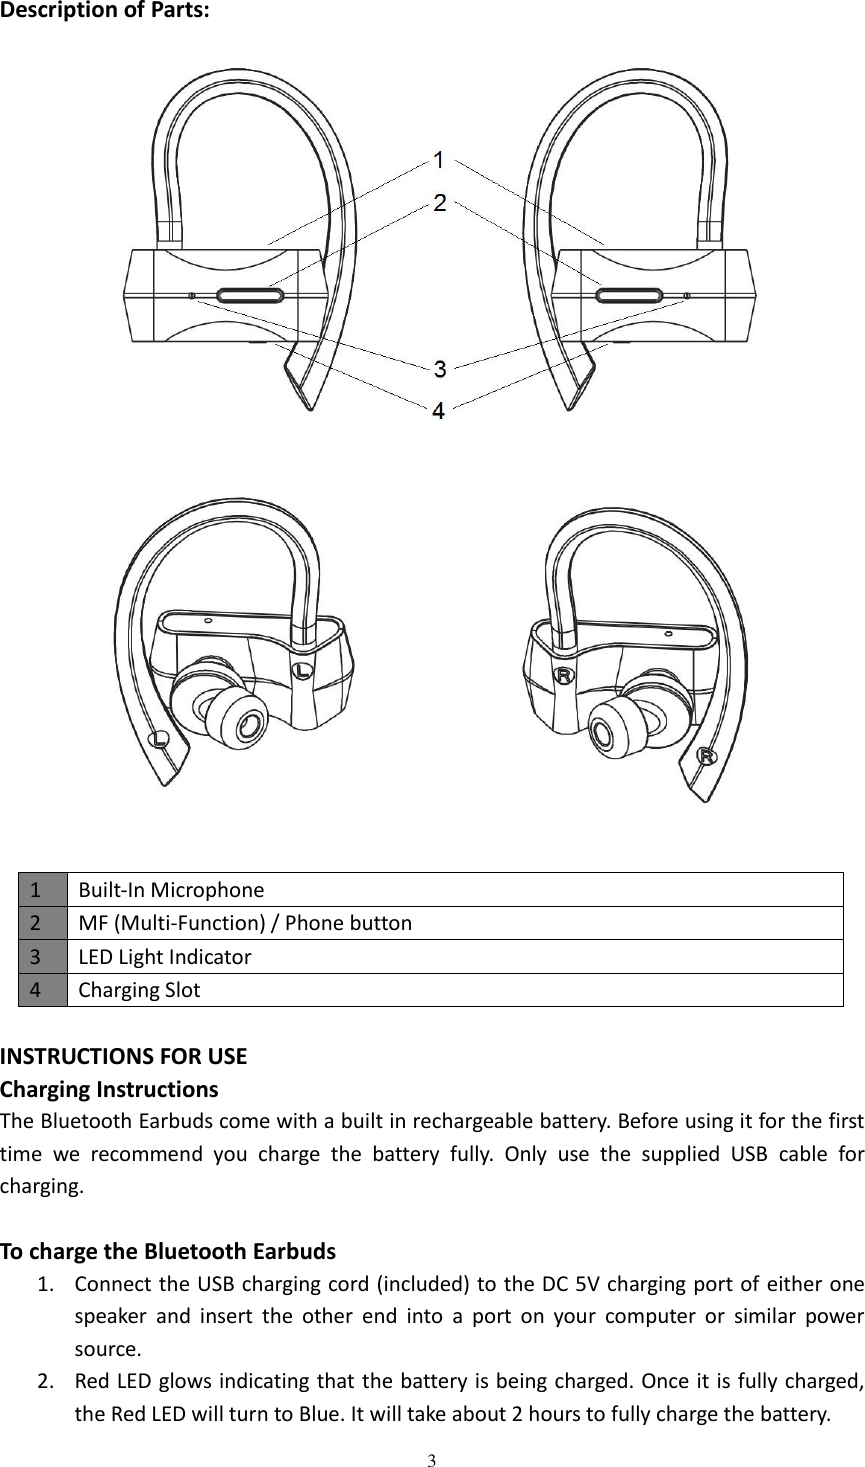  3  Description of Parts:      INSTRUCTIONS FOR USE Charging Instructions The Bluetooth Earbuds come with a built in rechargeable battery. Before using it for the first time  we  recommend  you  charge  the  battery  fully.  Only  use  the  supplied  USB  cable  for charging.  To charge the Bluetooth Earbuds 1. Connect the USB charging cord (included) to the DC 5V charging port of either one speaker  and  insert  the  other  end  into  a  port  on  your  computer  or  similar  power source. 2. Red LED glows indicating that the battery is being charged. Once it is fully charged, the Red LED will turn to Blue. It will take about 2 hours to fully charge the battery. 1 Built-In Microphone 2 MF (Multi-Function) / Phone button 3 LED Light Indicator 4 Charging Slot 